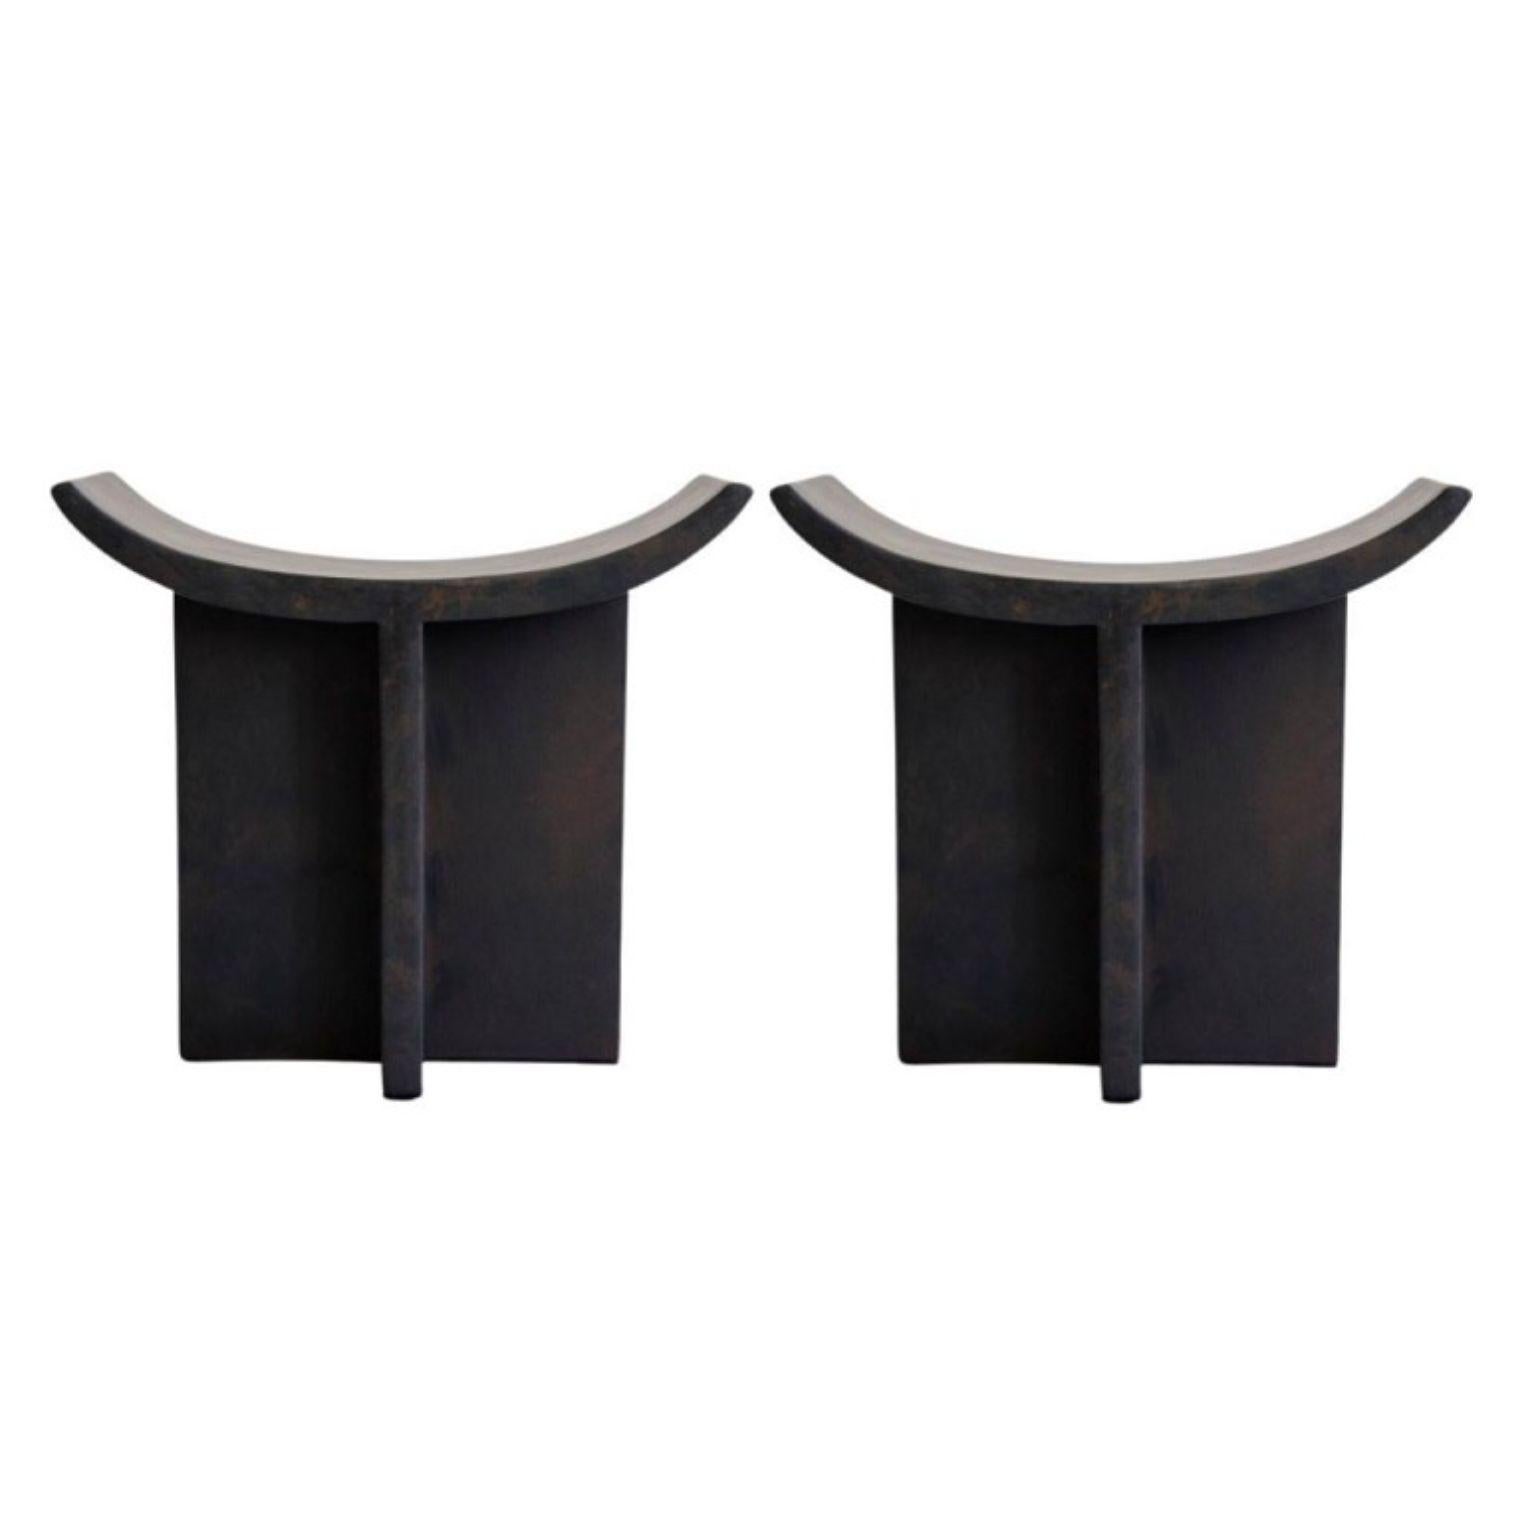 Set of 2 Brutus Stools by 101 Copenhagen
Designed by Kristian Sofus Hansen & Tommy Hyldahl
Dimensions: L 60 / W 30 / H 54 cm.
Materials: fiber concrete

Inspired by the Brutalist architecture movement of the mid-20th century, the Brutus